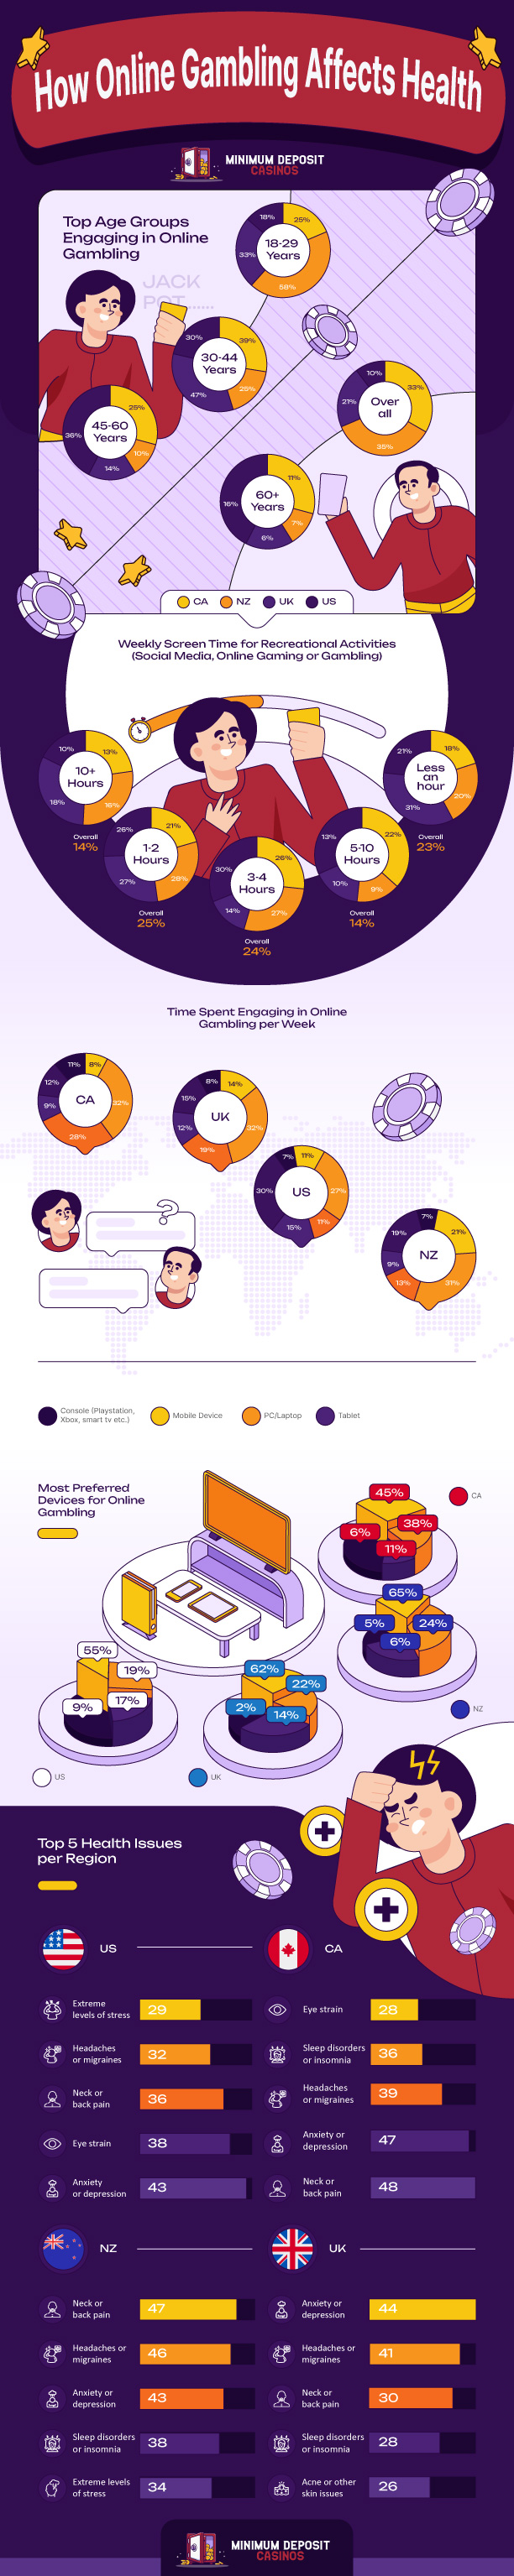 Infographic showing Key Findings from Online Gambling and Health Survey